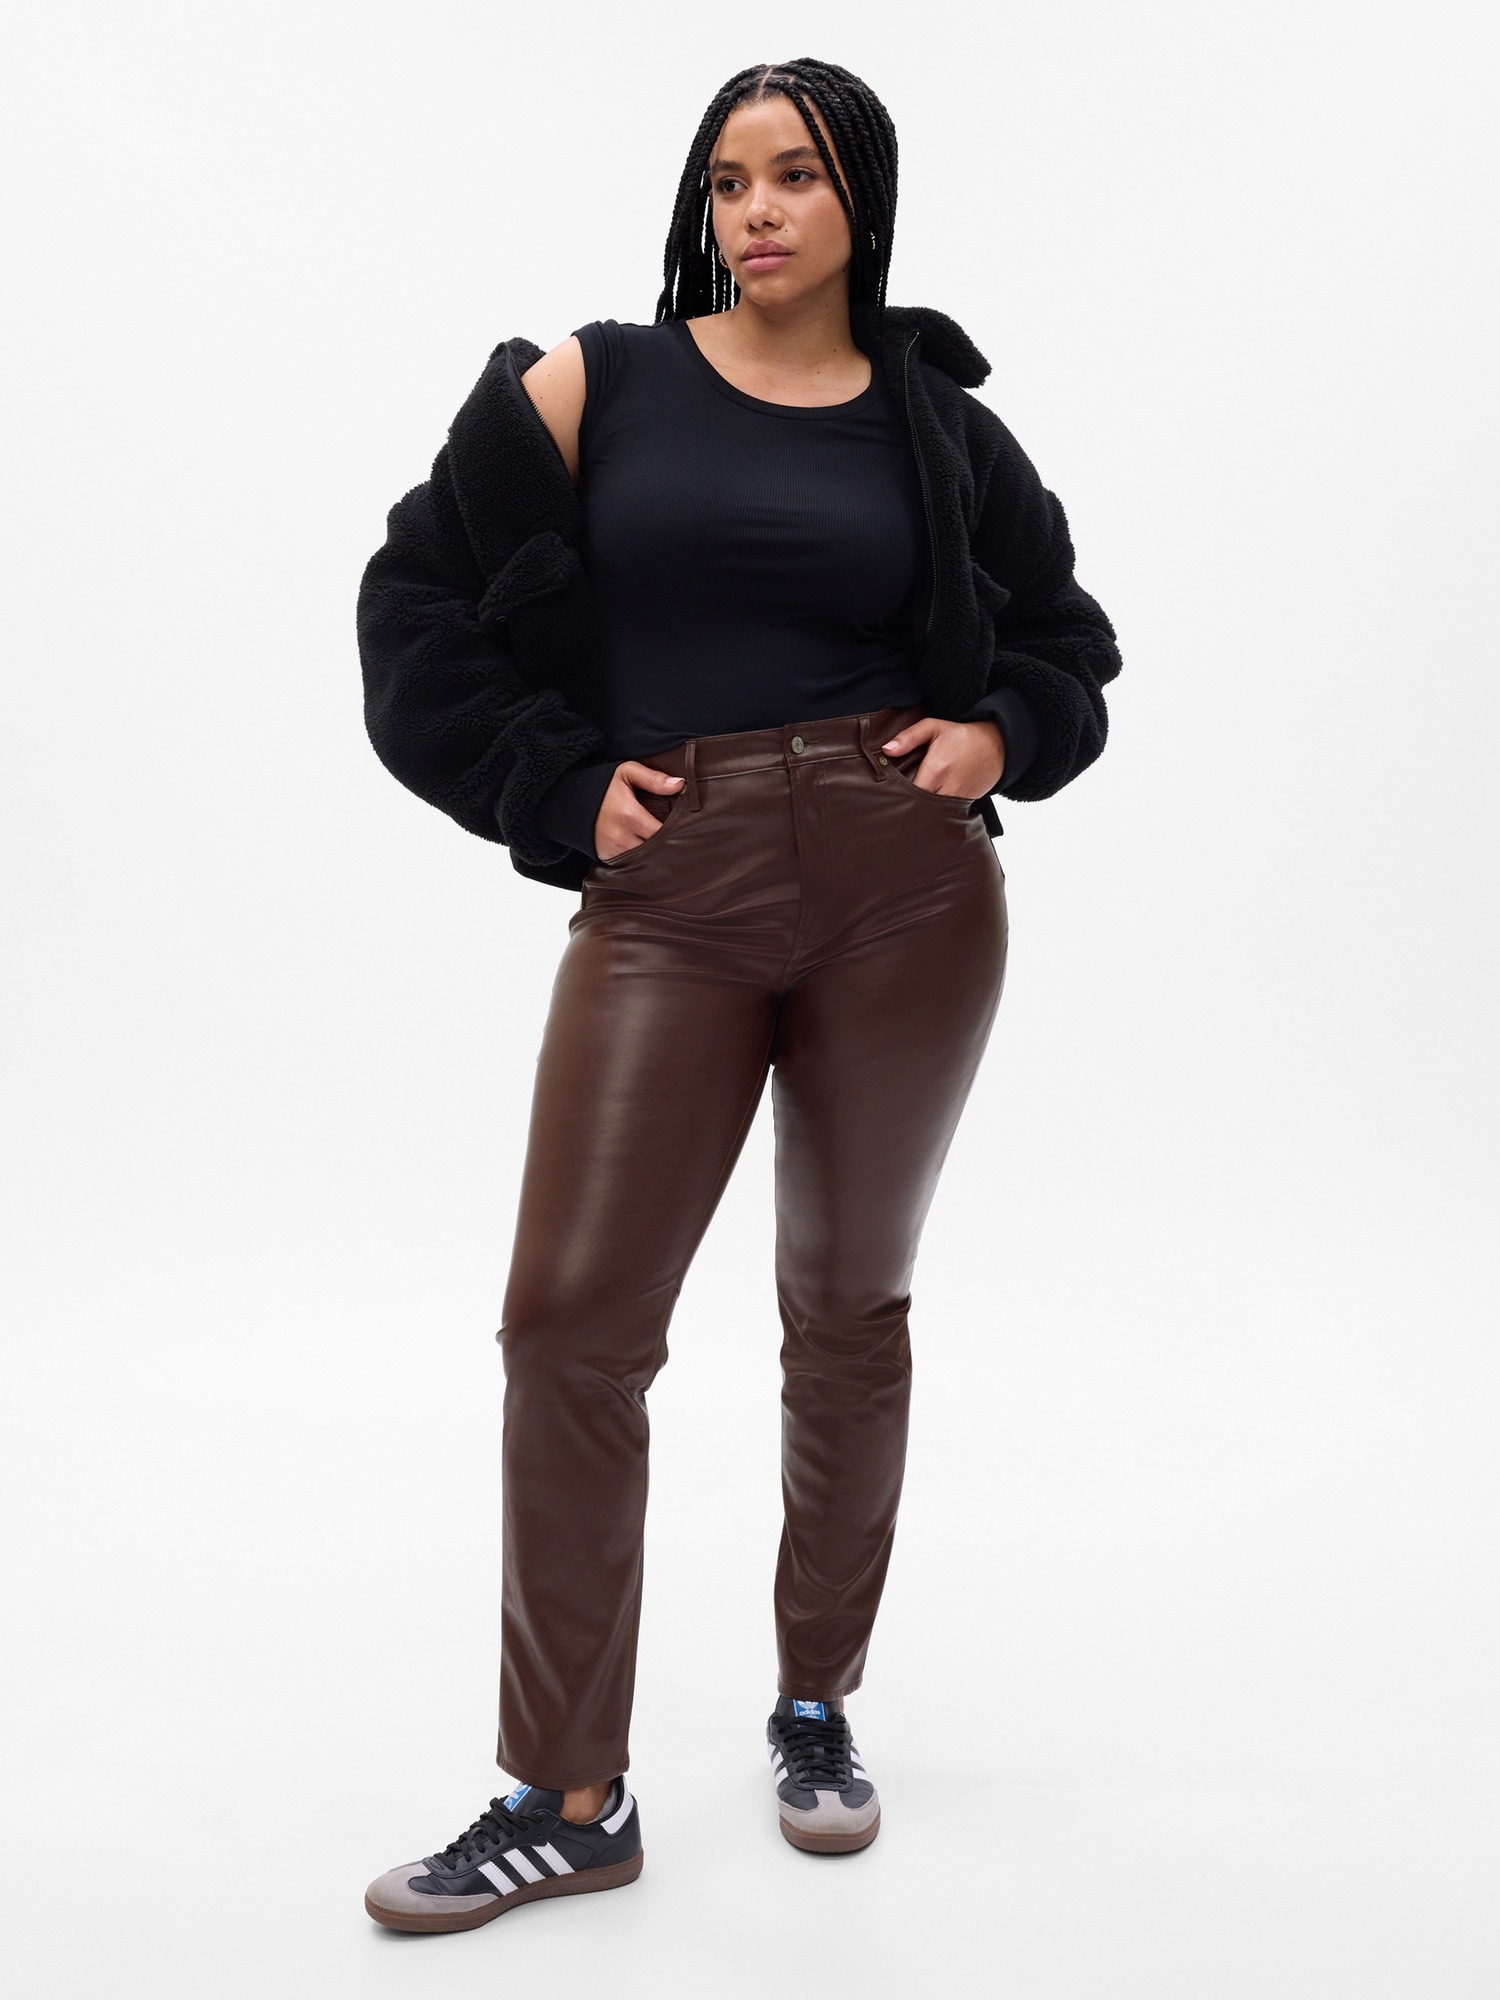 Trendy High Rise Paper Bag Style Brown Leather Pants for Women